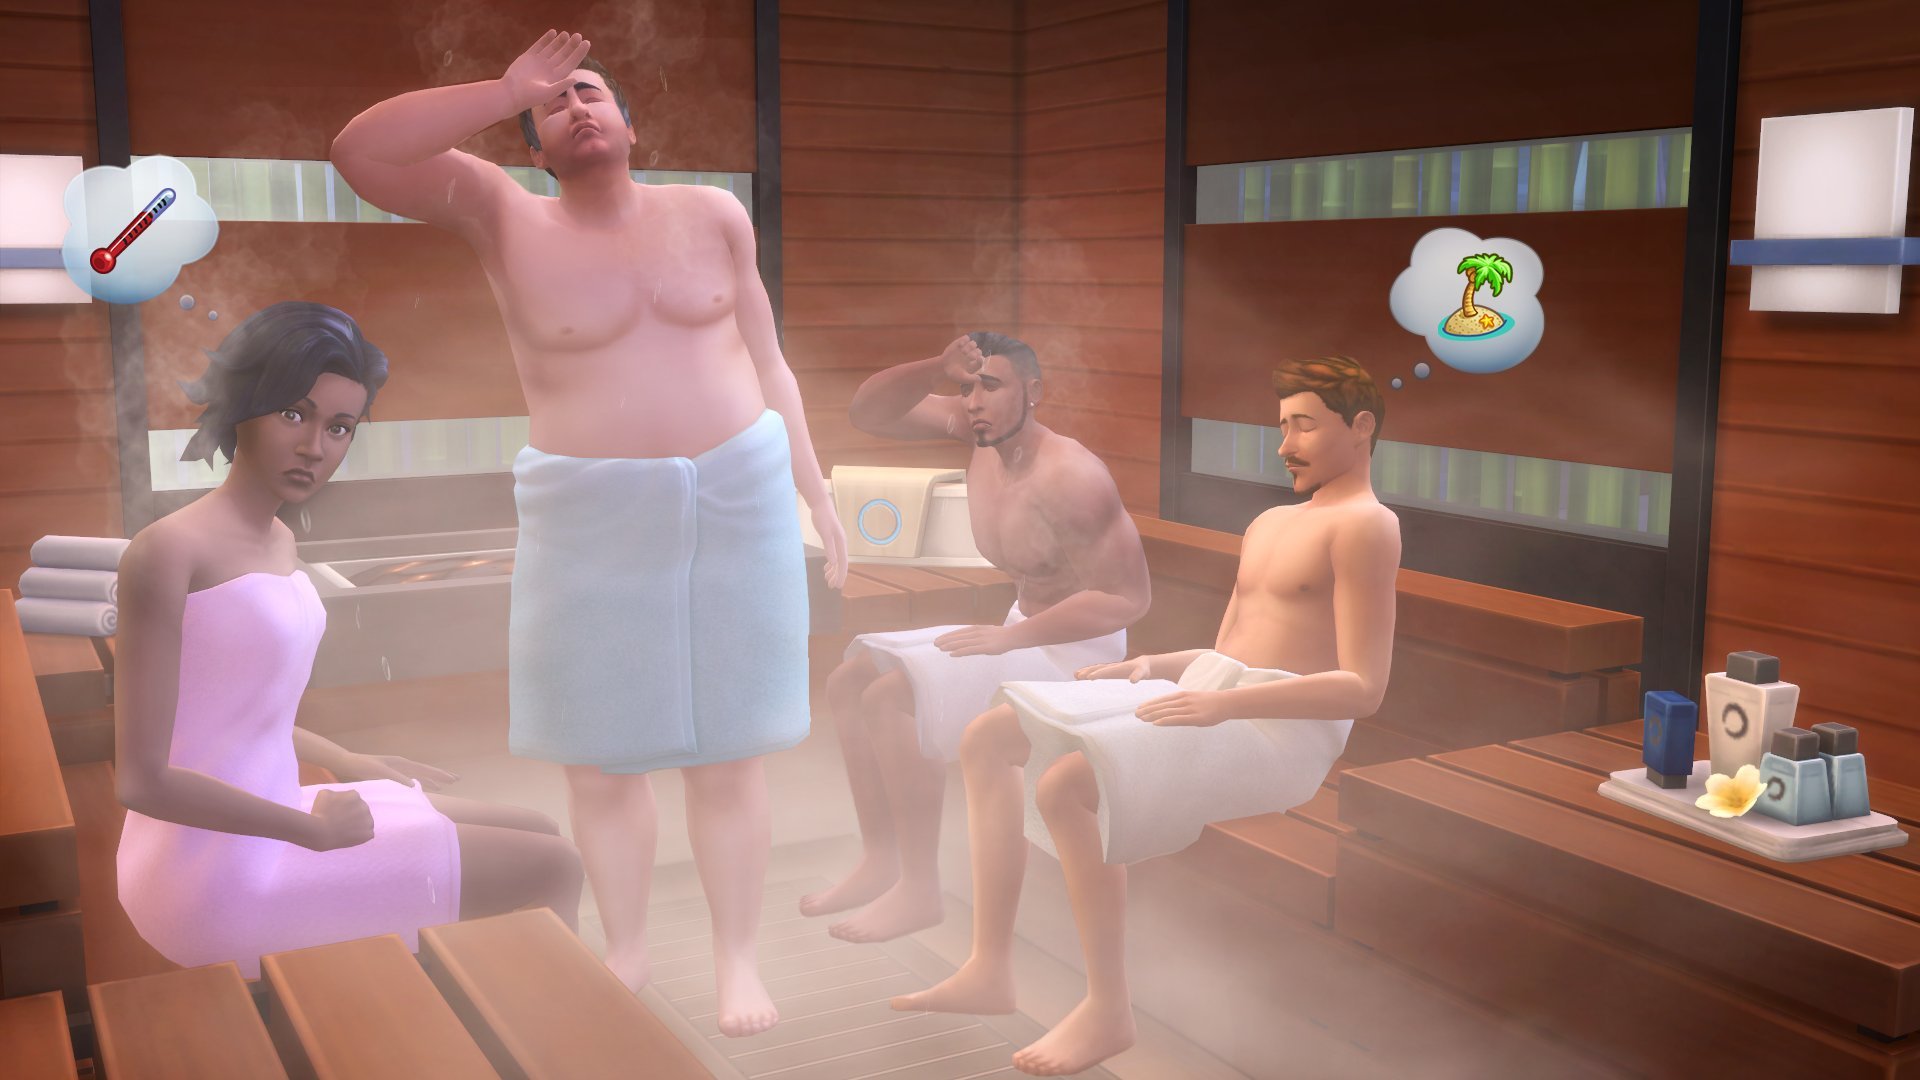 The Sims 4 - Spa Day - Origin PC [Online Game Code]